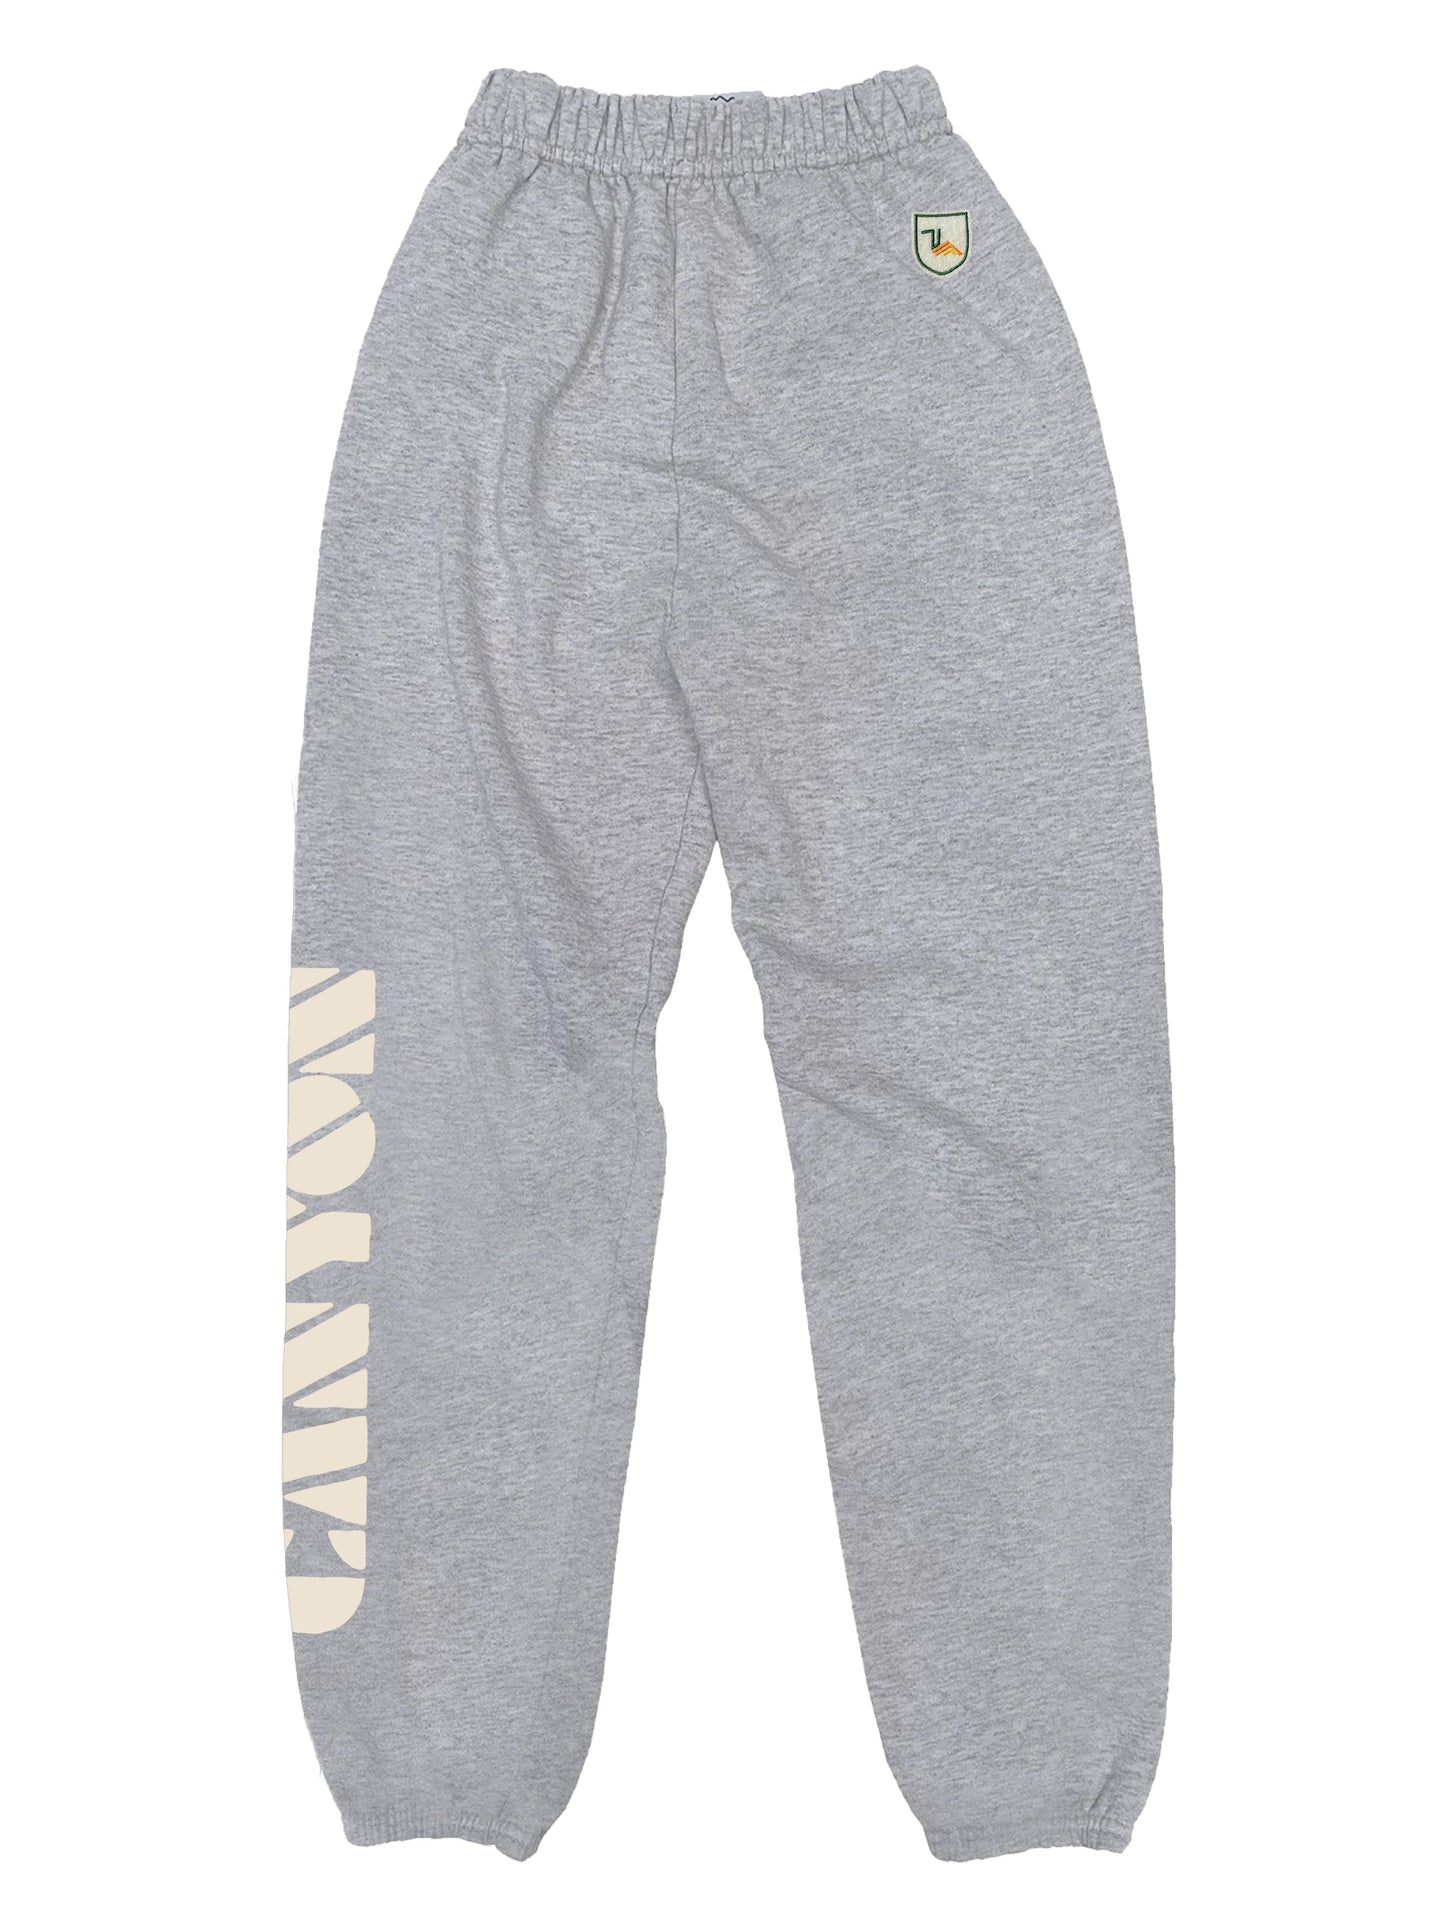 Canyon Adult Sweats in Heather Grey